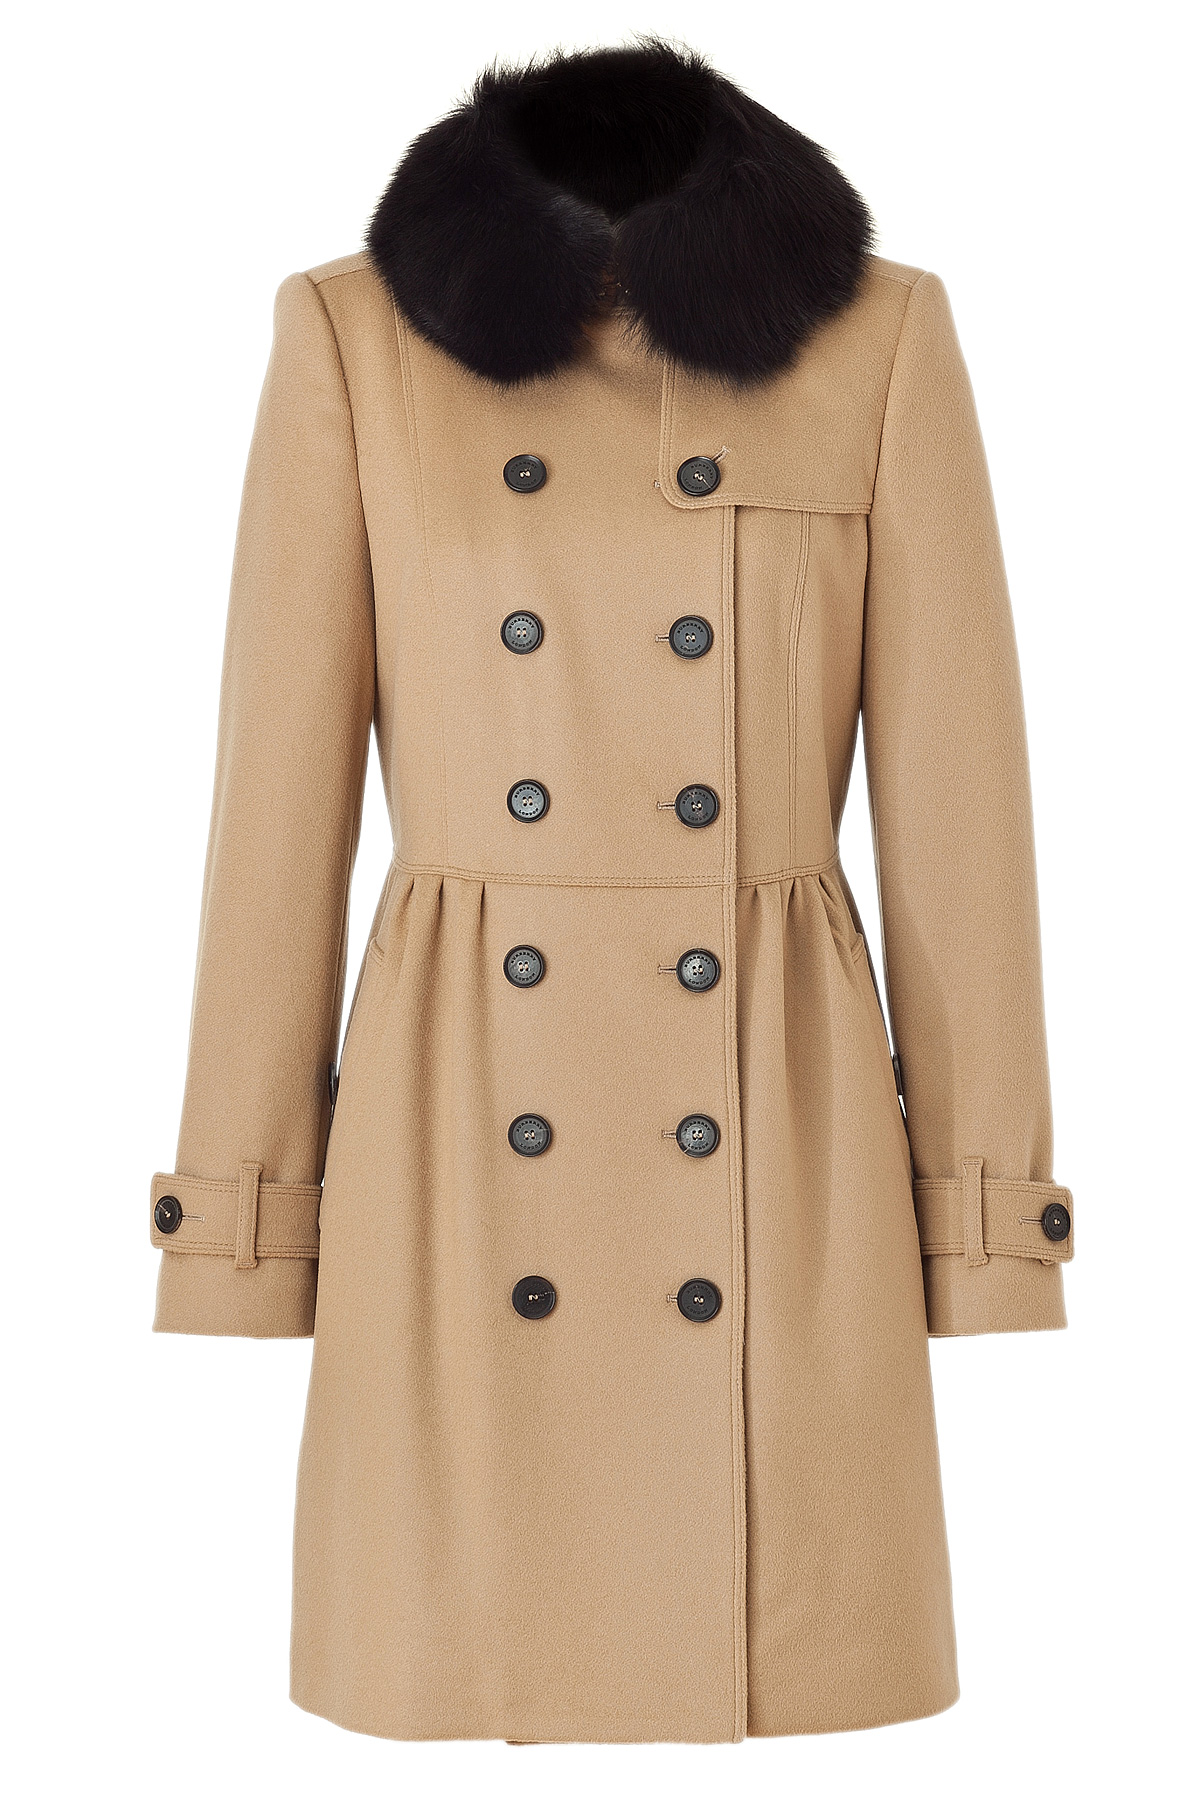 Burberry Camel Cashmere Wool Coat with A Removable Fur Collar in Beige ...